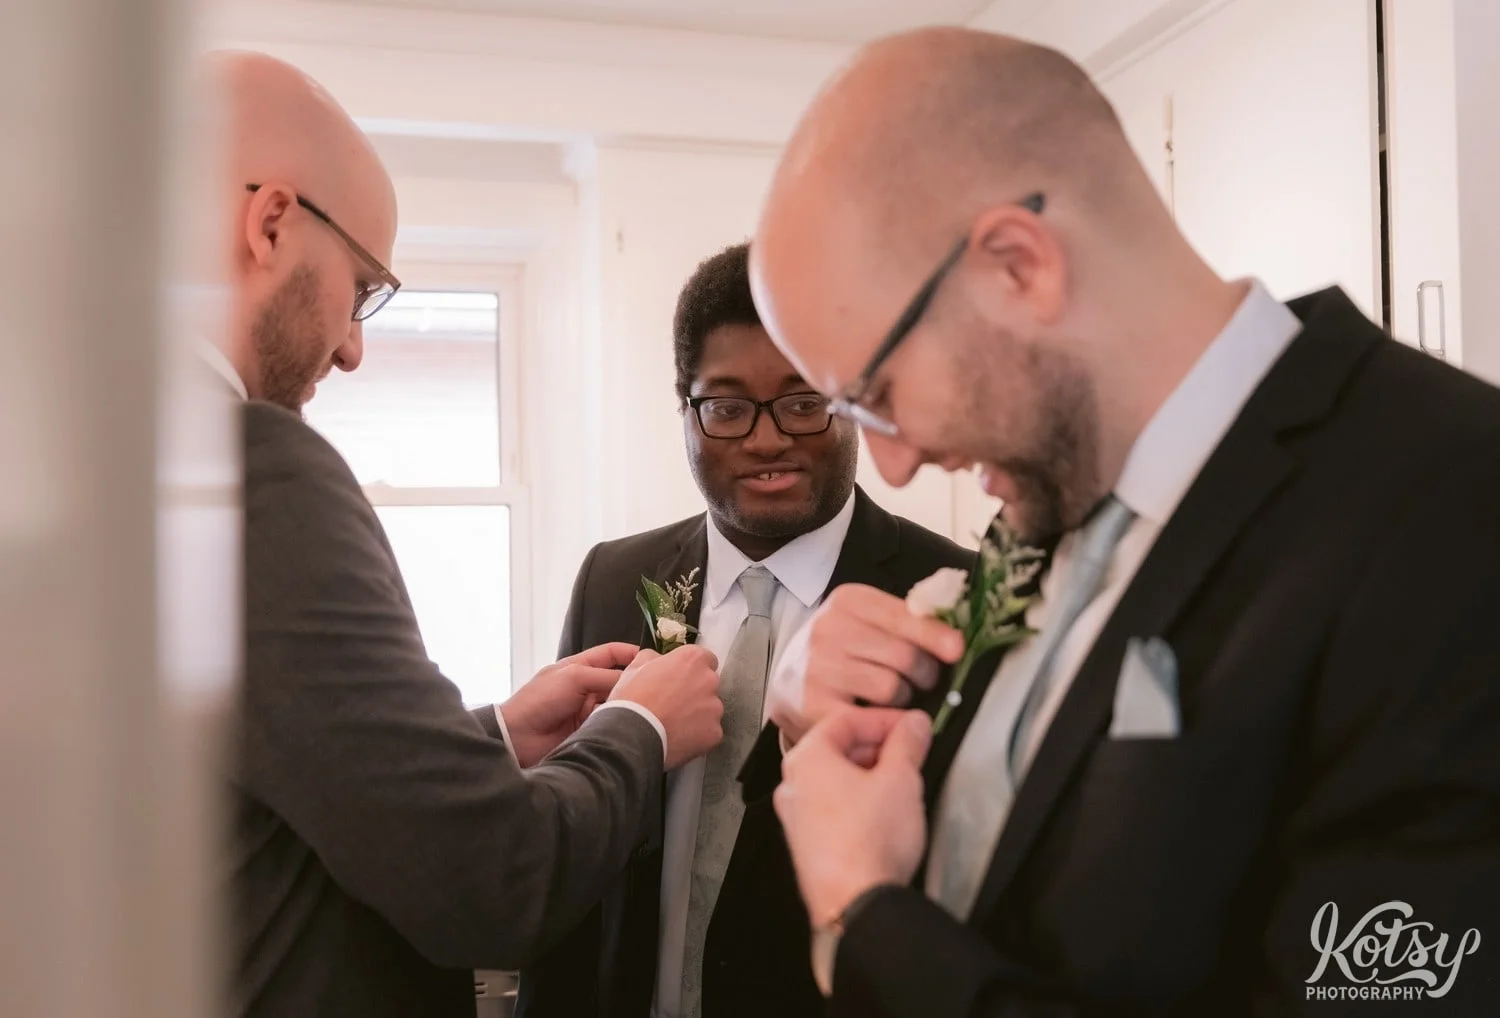 Three men getting ready for a wedding by adjusting their boutineers